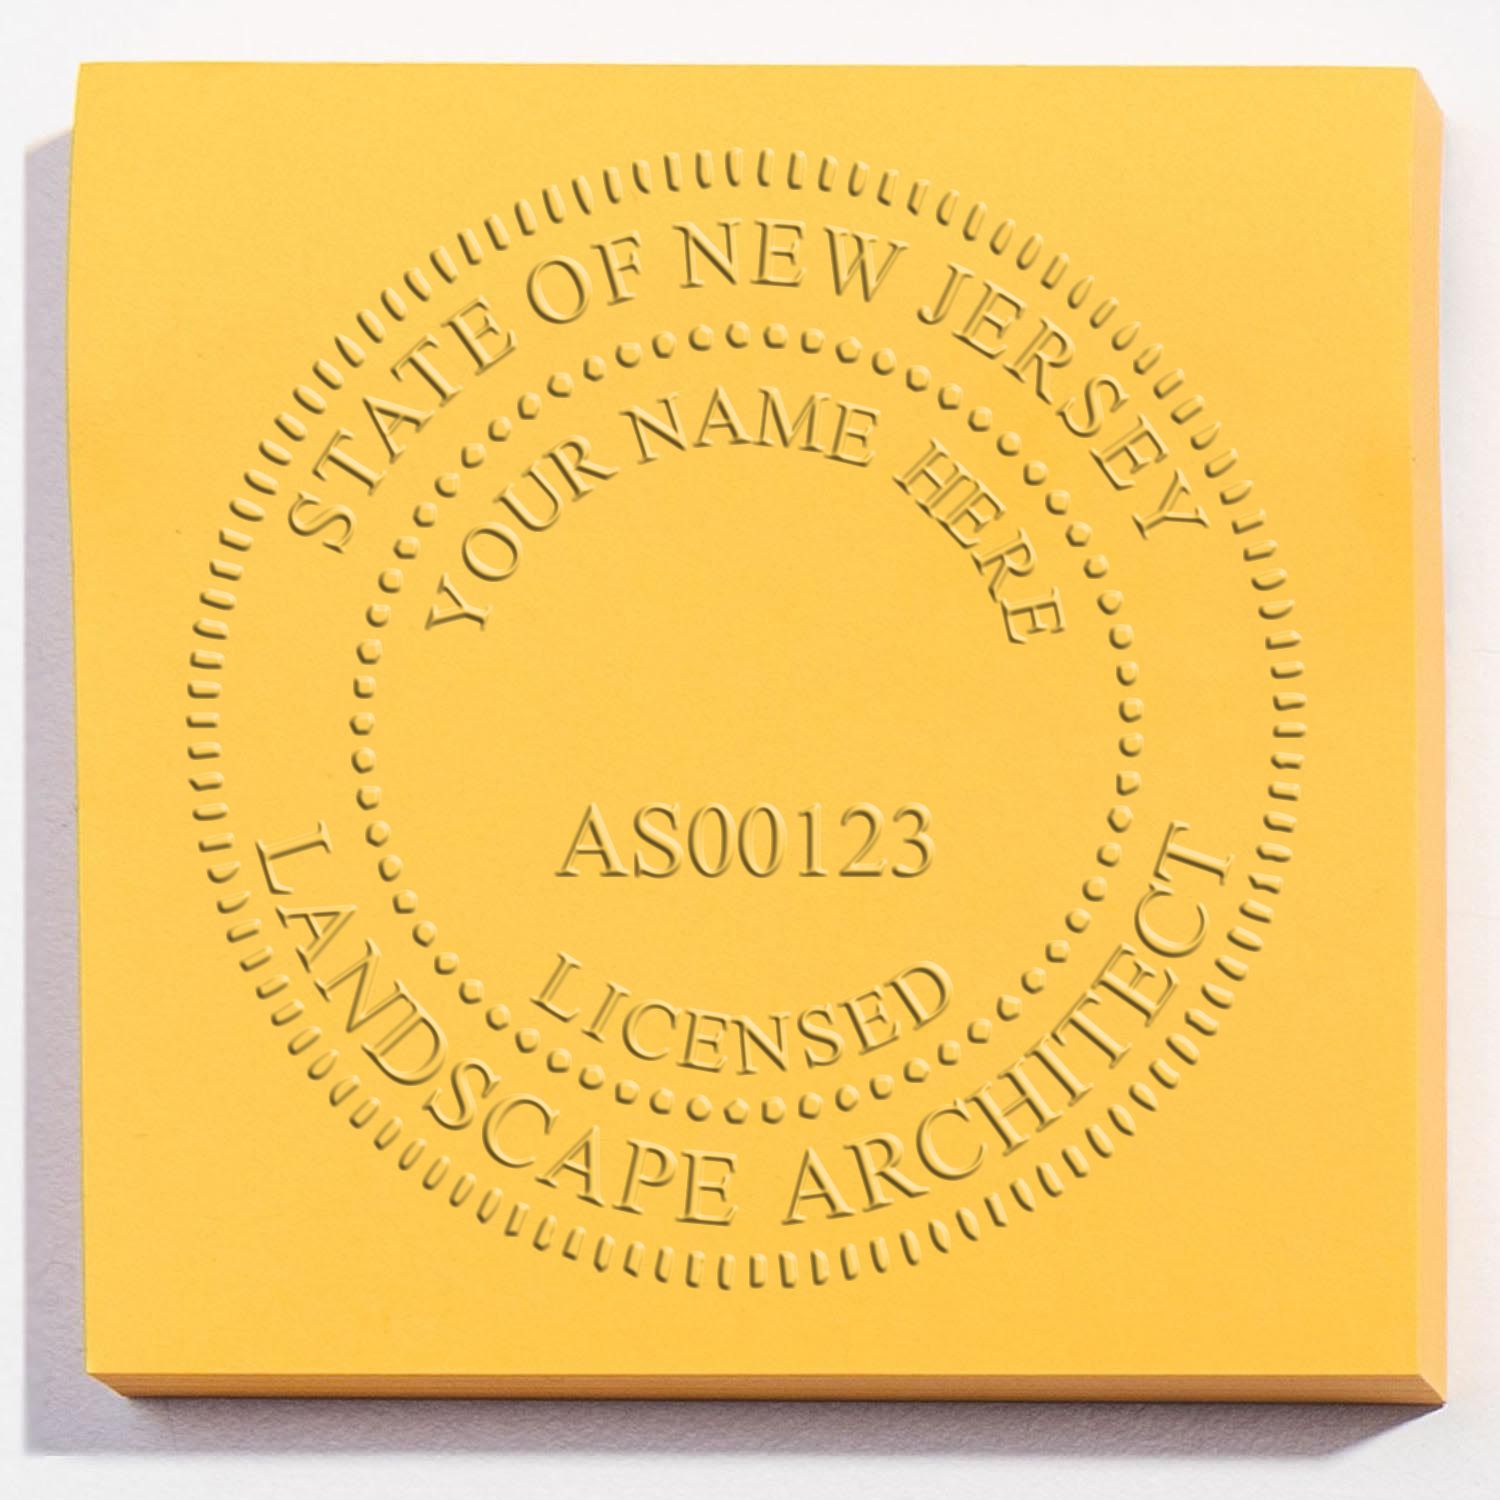 A photograph of the Hybrid New Jersey Landscape Architect Seal stamp impression reveals a vivid, professional image of the on paper.